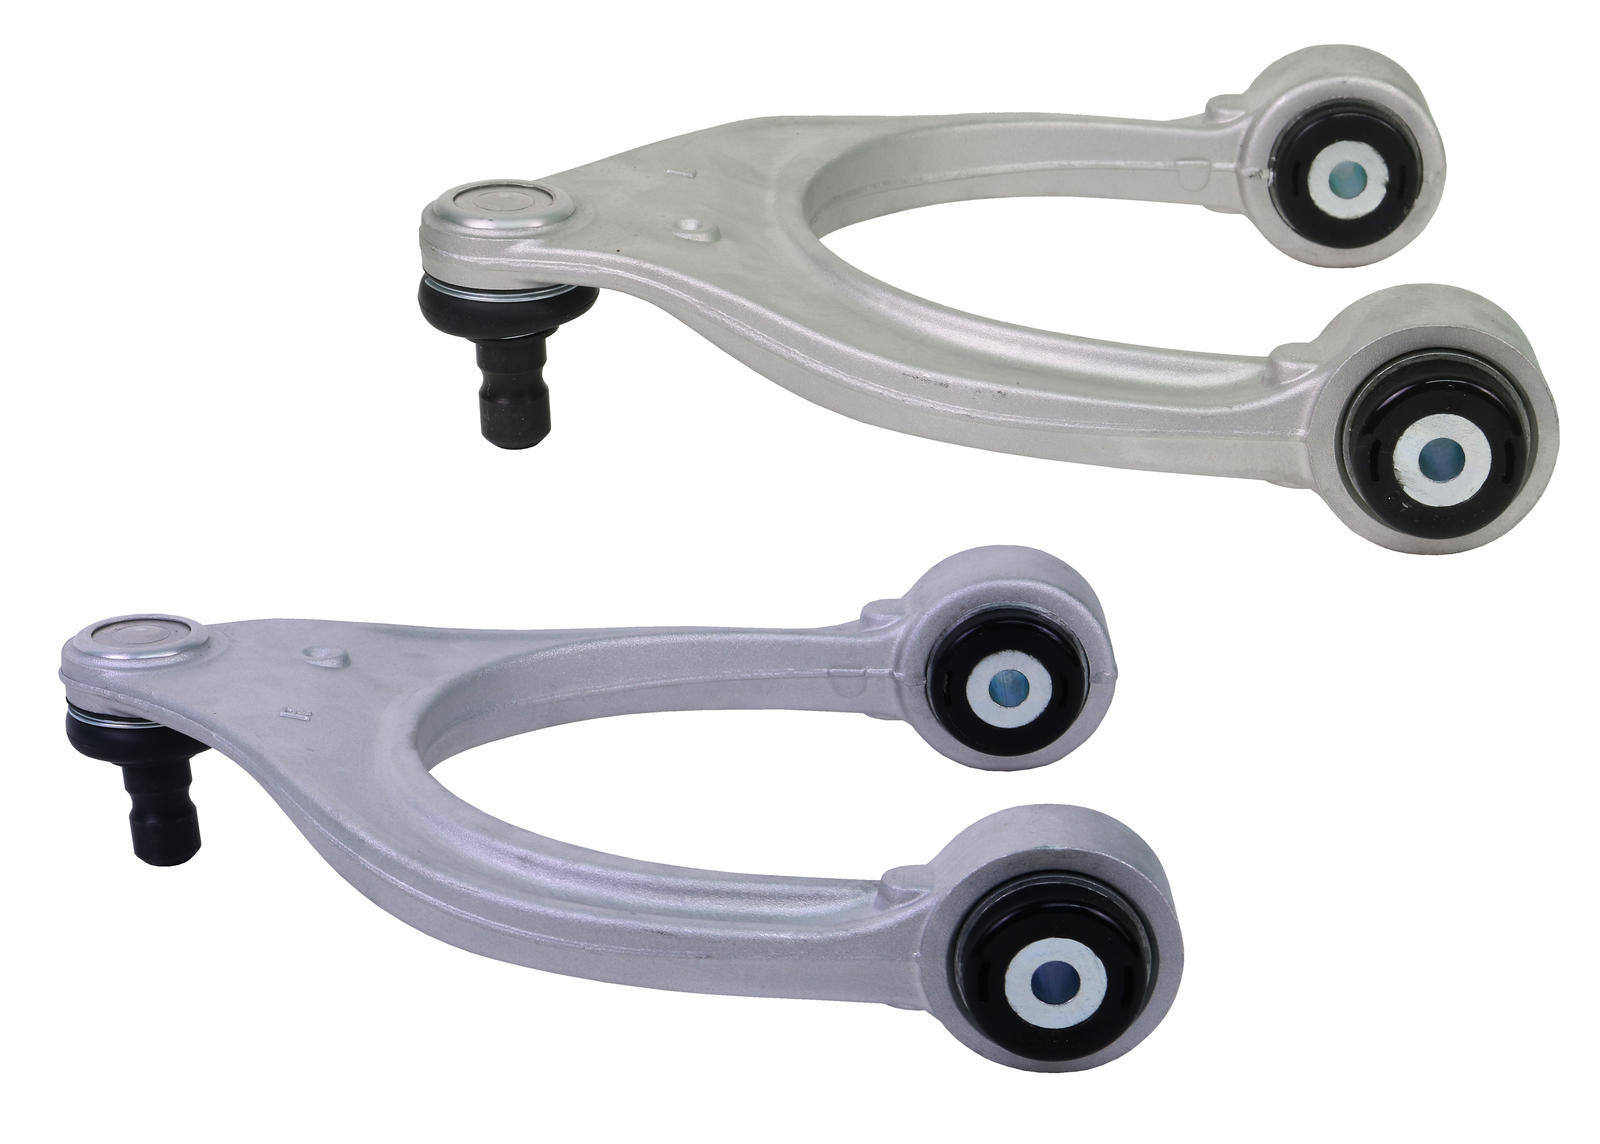 Front Control Arm Upper - Arm to Suit Ford Falcon FG, FGX and FPV